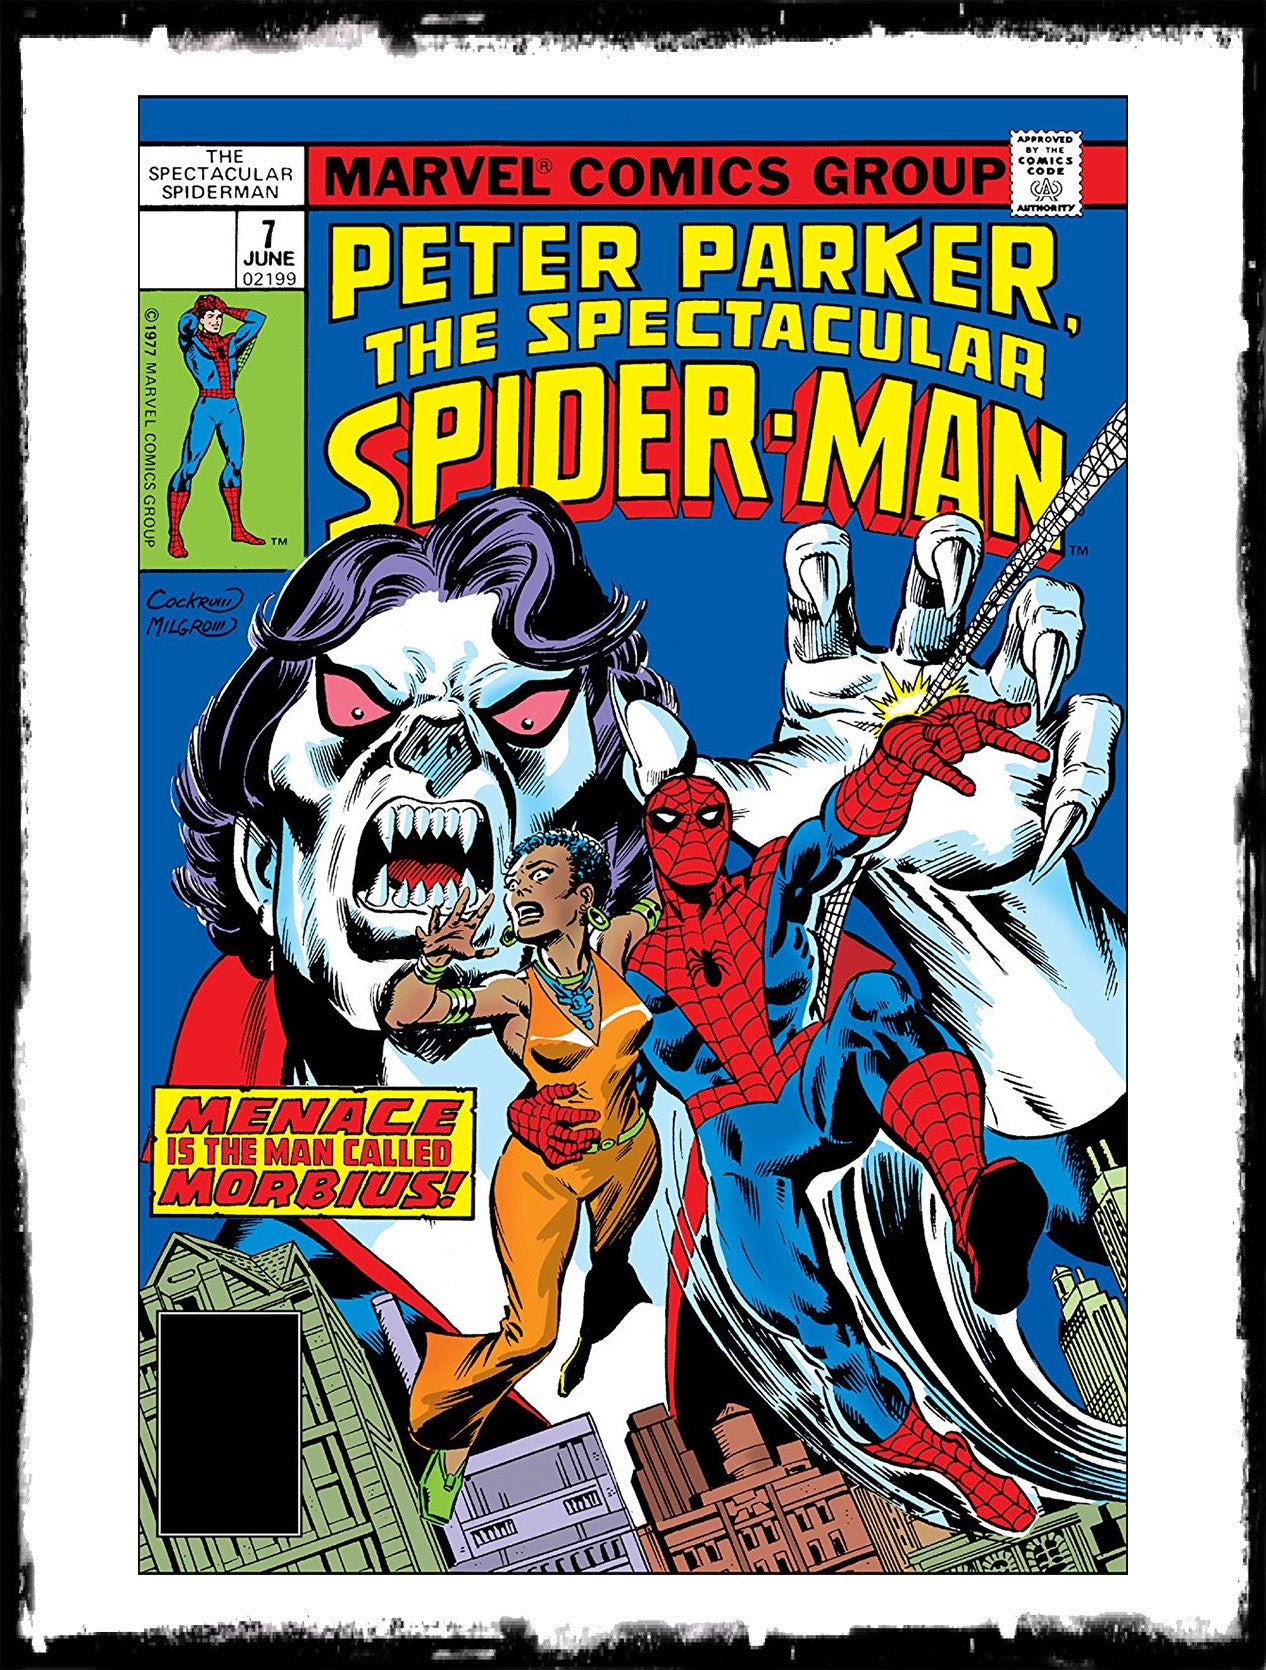 SPECTACULAR SPIDER-MAN - #7 "CRY MORBIUS" (1977 - FN/VF)